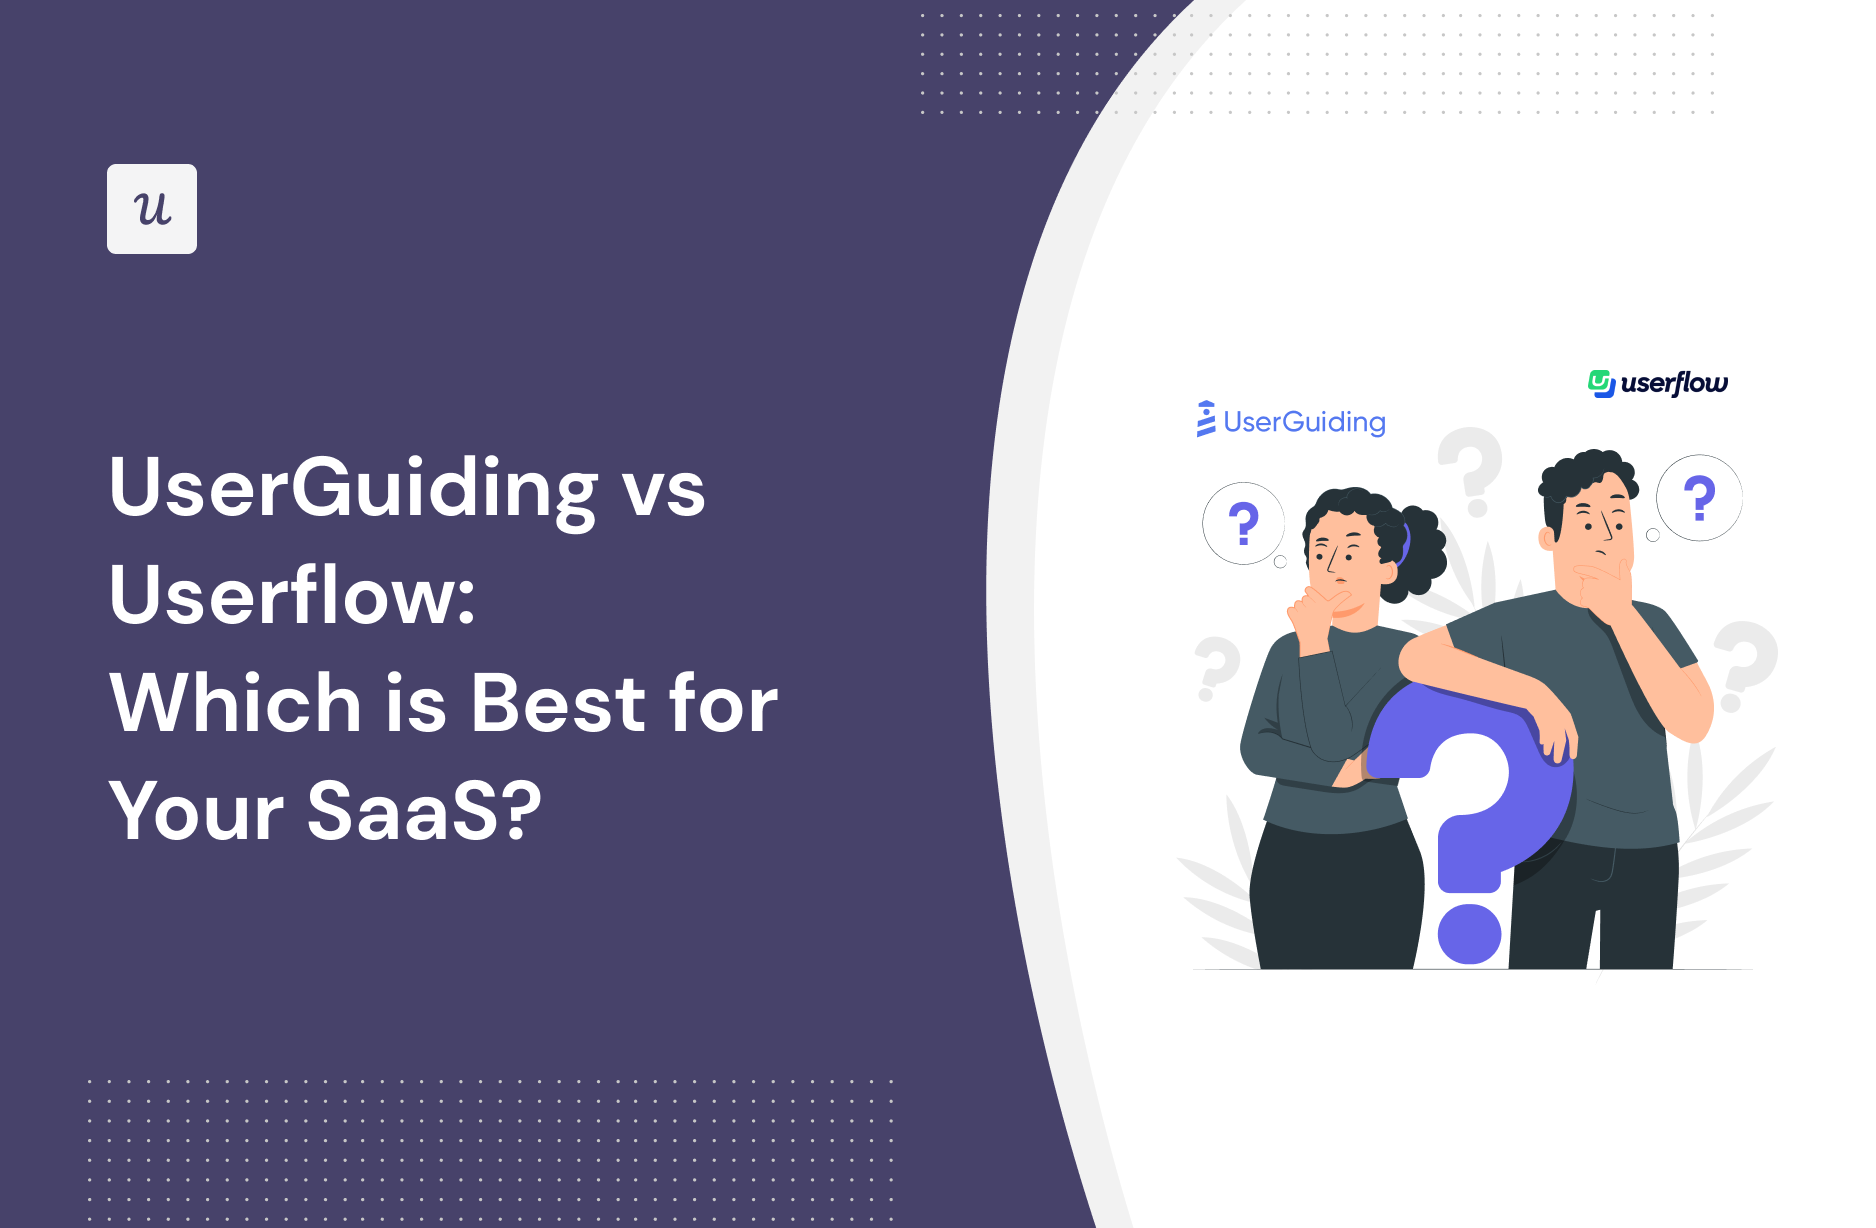 UserGuiding vs Userflow: Which Is Best for Your SaaS?